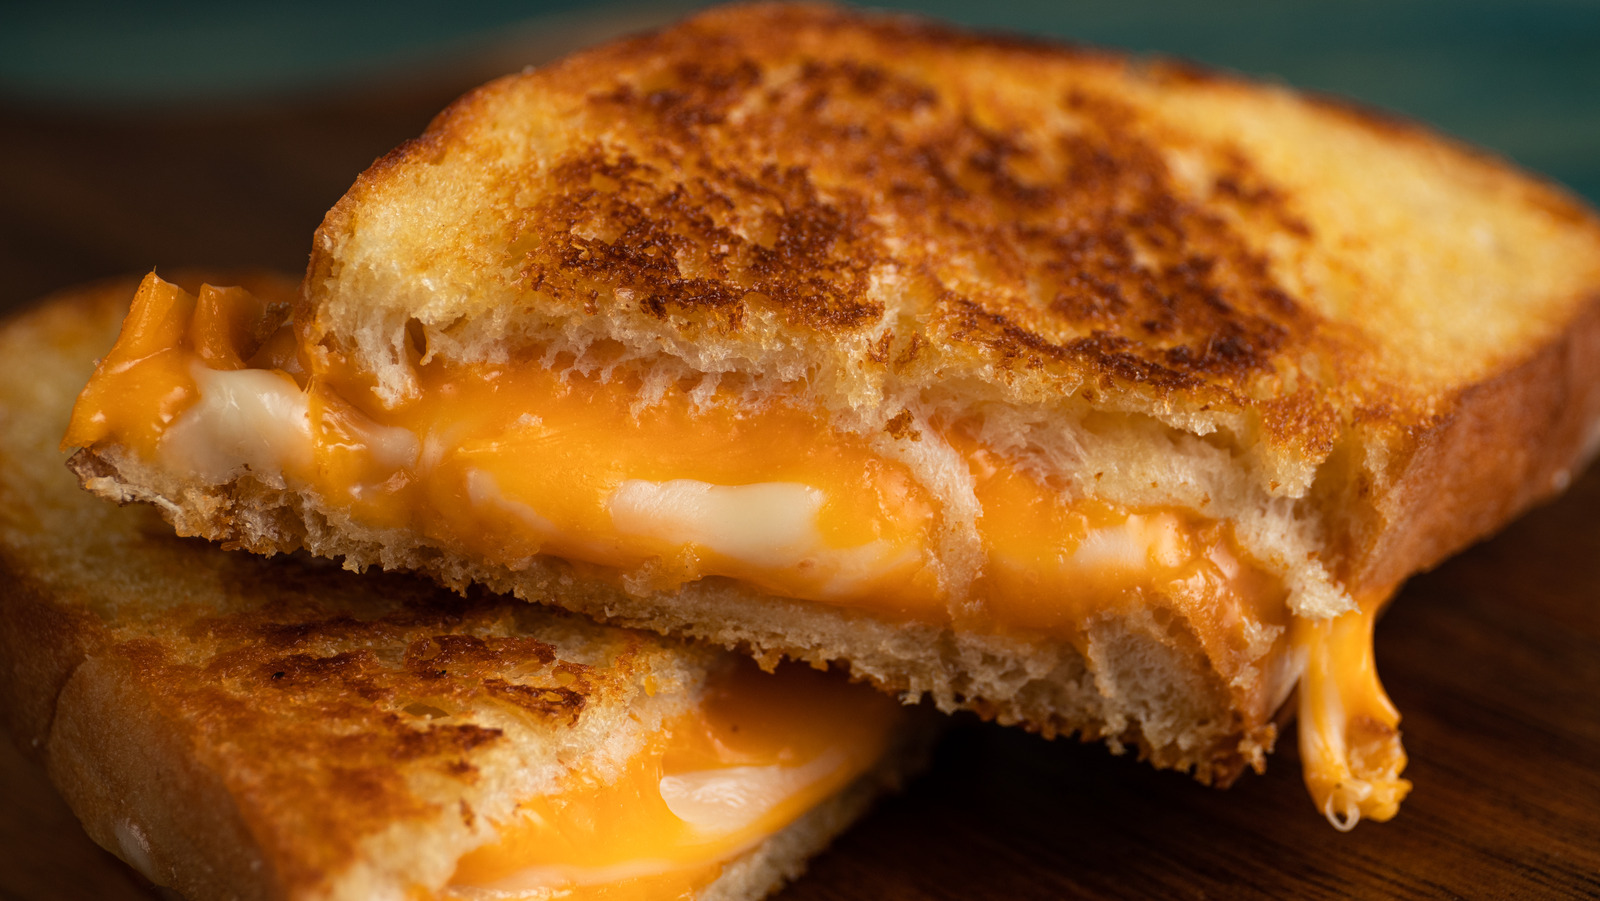 https://www.mashed.com/img/gallery/mayo-vs-butter-which-makes-a-crispier-grilled-cheese/l-intro-1682616135.jpg